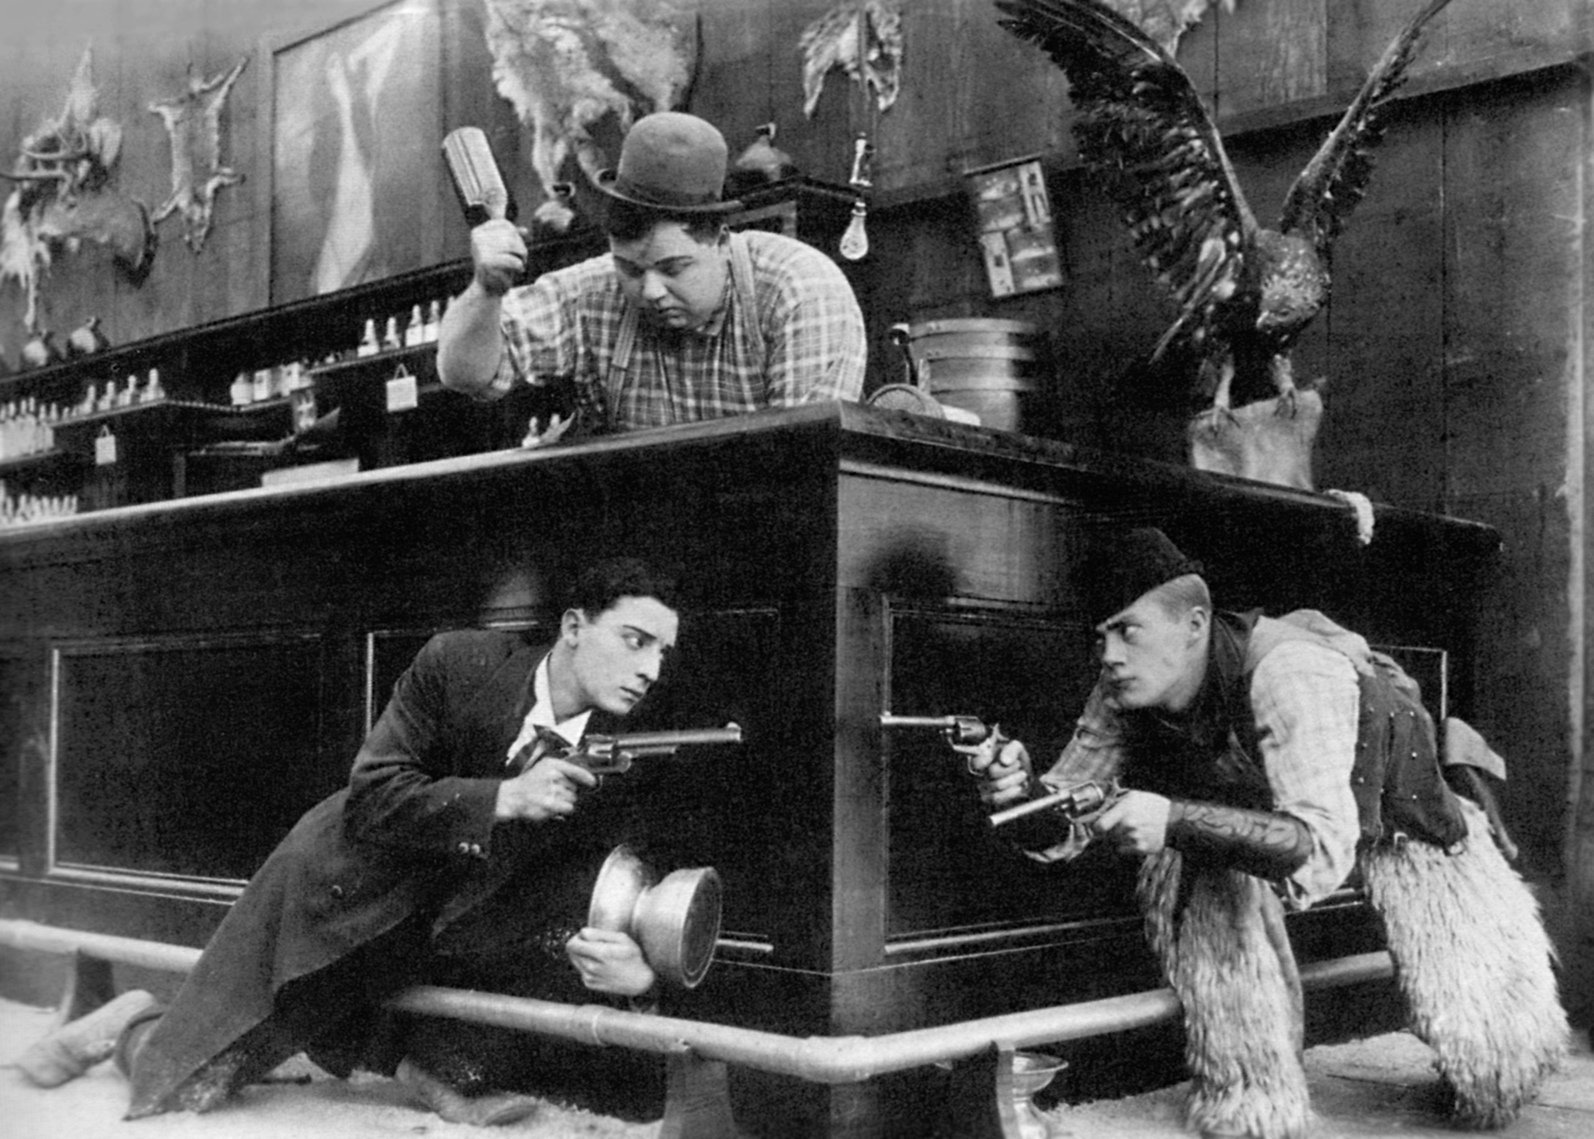 Buster Keaton in a scene from "Out West" (1918).